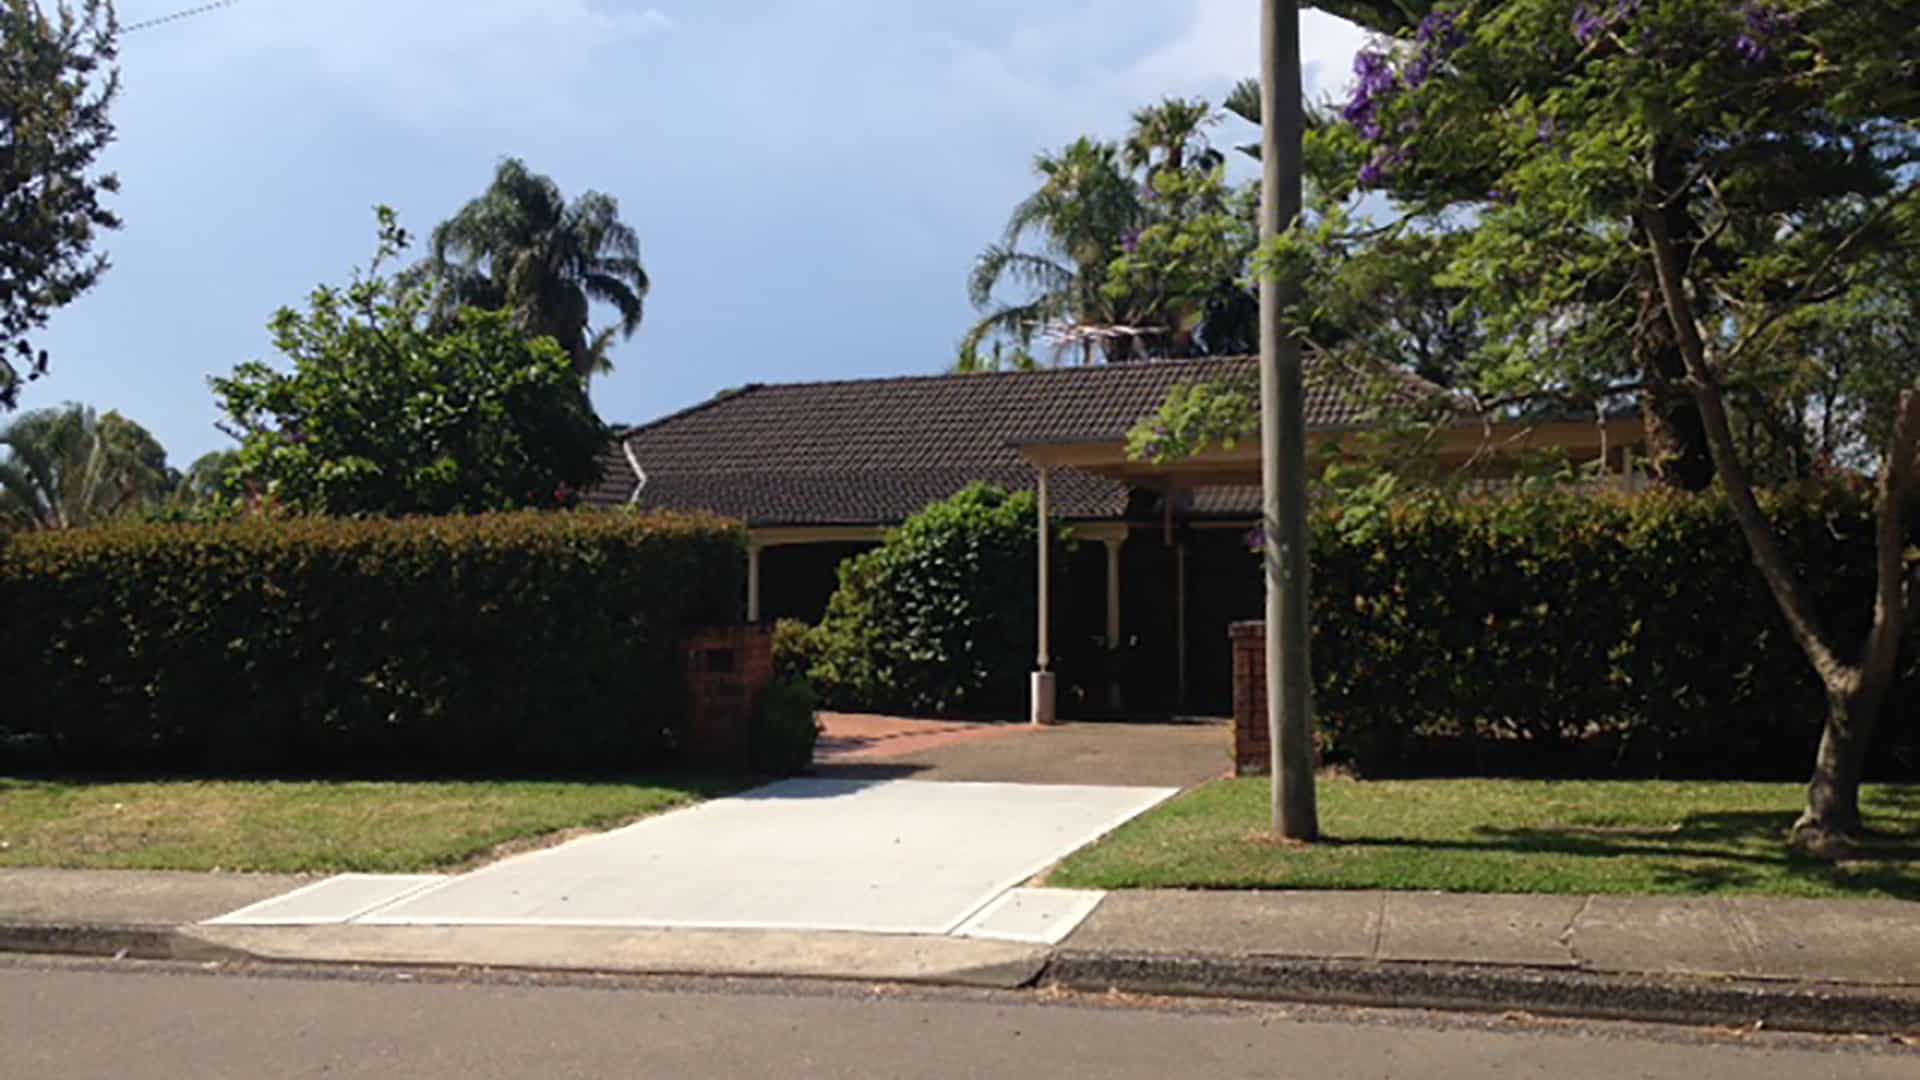 Street view of the Terrey Hills 1 property, a tall hedge sits in front of the house, the driveway leads to a covered car spot that connects to the house